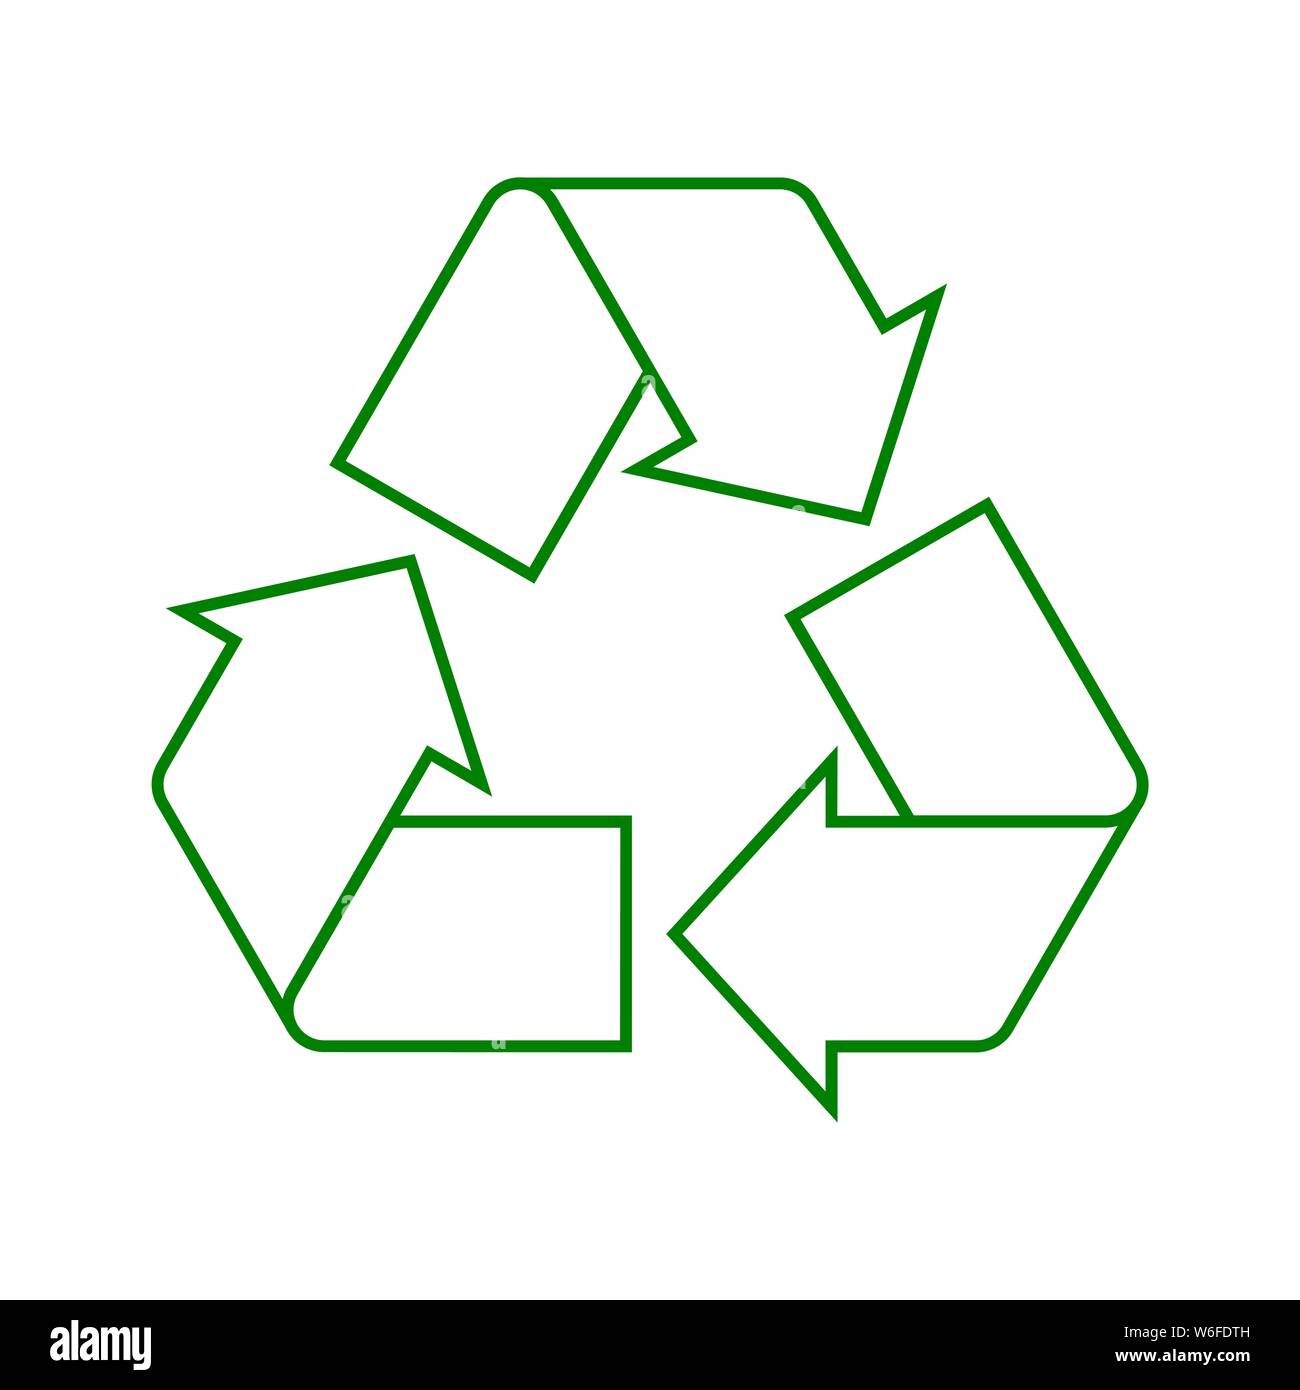 https://c8.alamy.com/comp/W6FDTH/simple-green-recycle-sign-outline-linear-recycle-symbol-icon-or-logo-on-white-background-label-for-recyclable-productsreduce-reuse-recycle-concept-W6FDTH.jpg